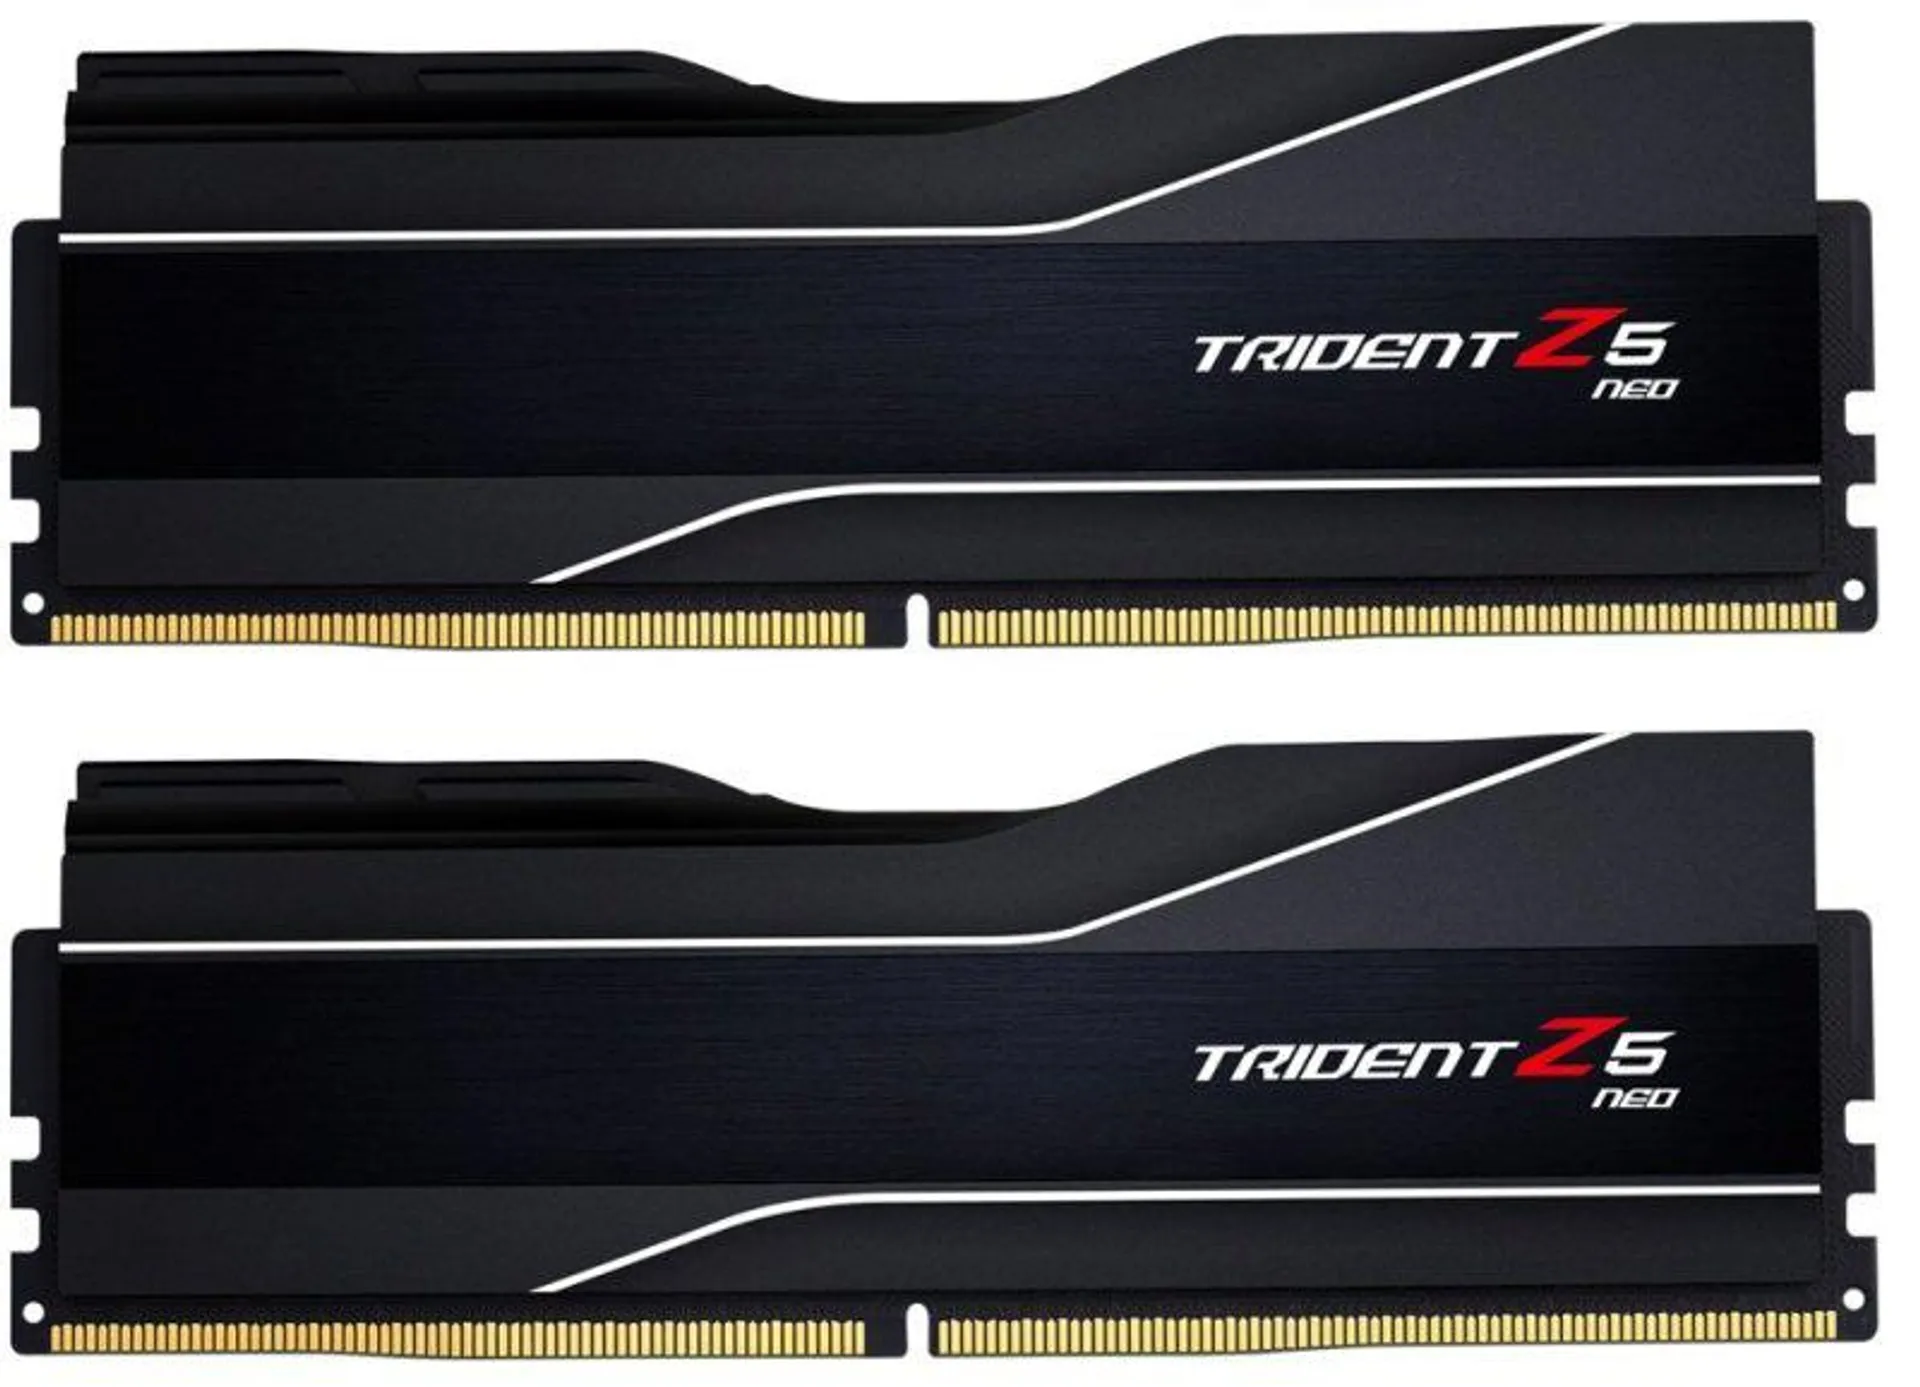 G.Skill Trident Z5 NEO 32GB 5600MHz CL28 DDR5 Memory - AMD Expo